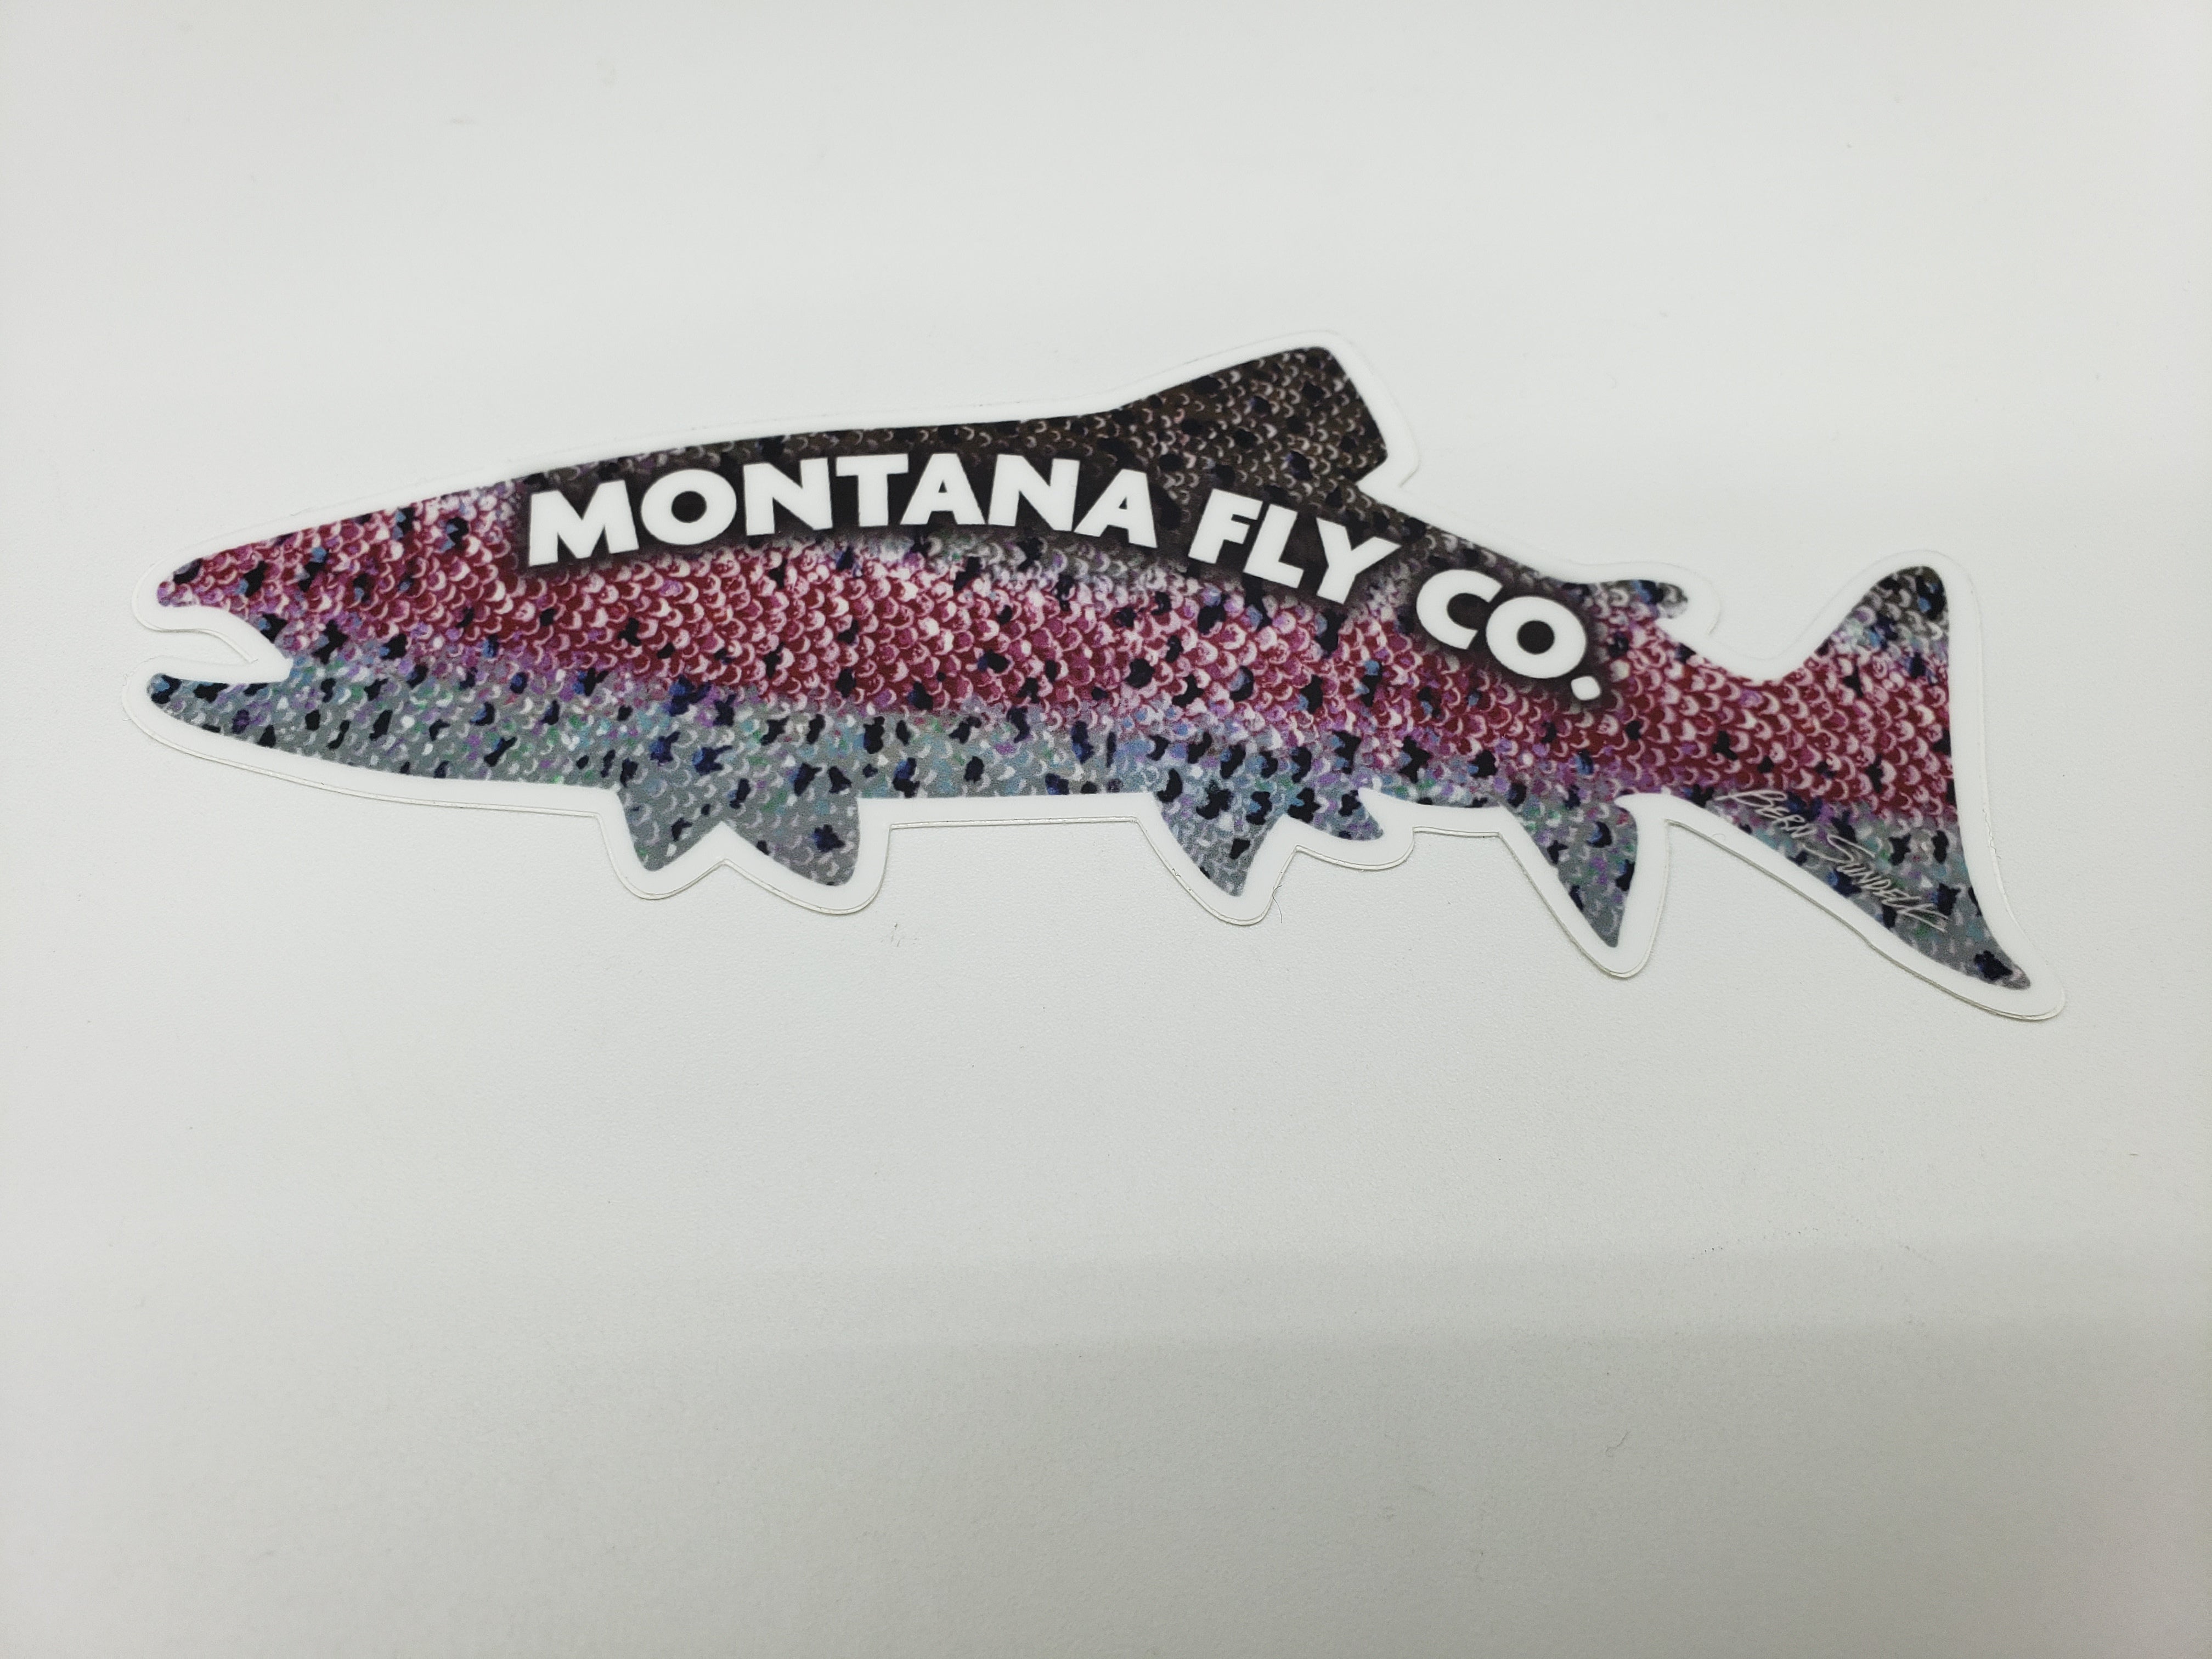 Montana Fly Co. Stickers - Sundell's Rainbow Trout Skin